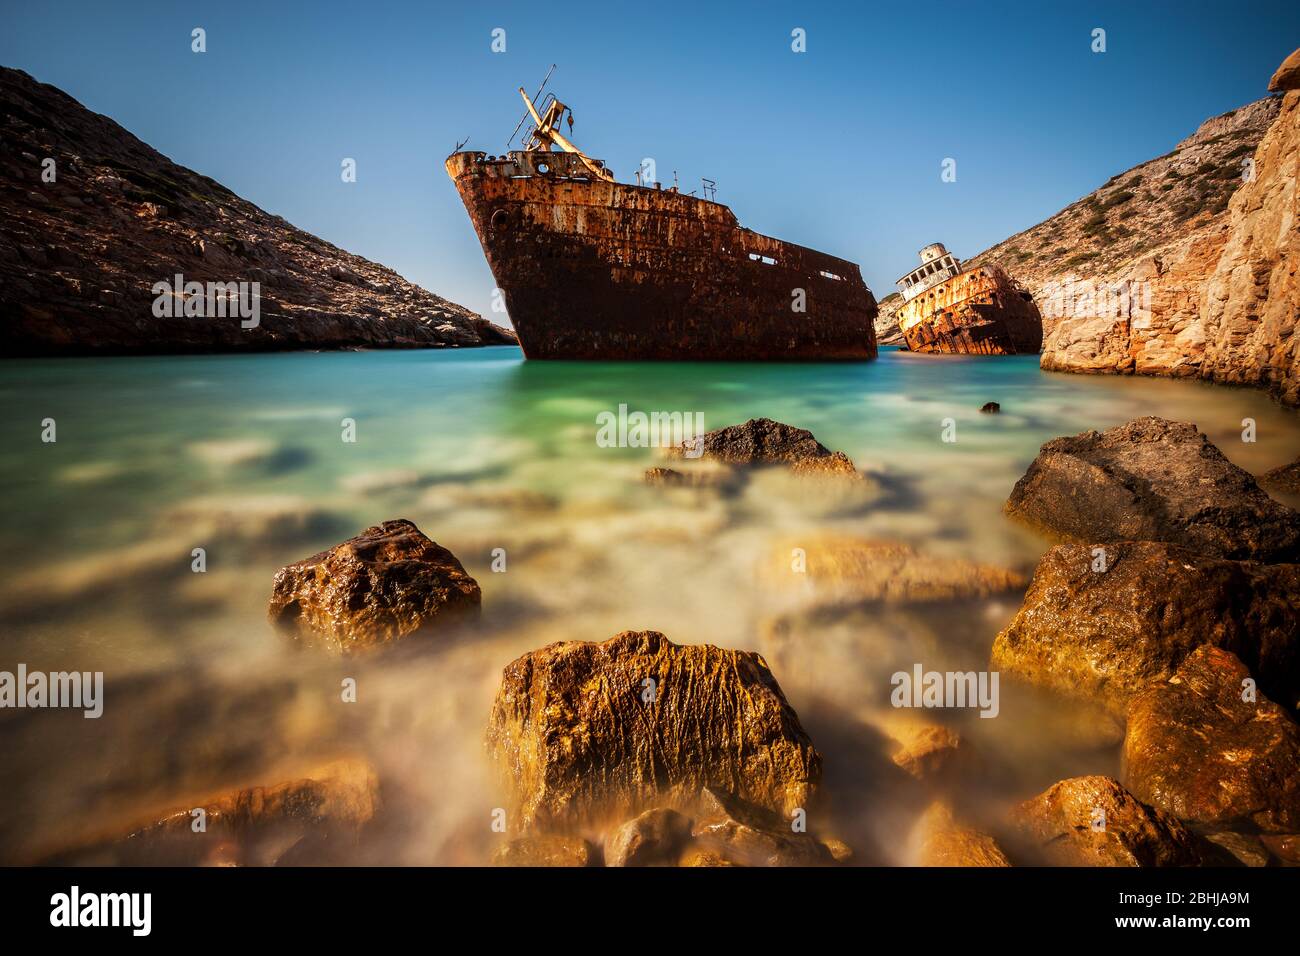 A shipwreck in Amorgos island, Nasso, Greece, Cyclades islands, Southern Europe Stock Photo